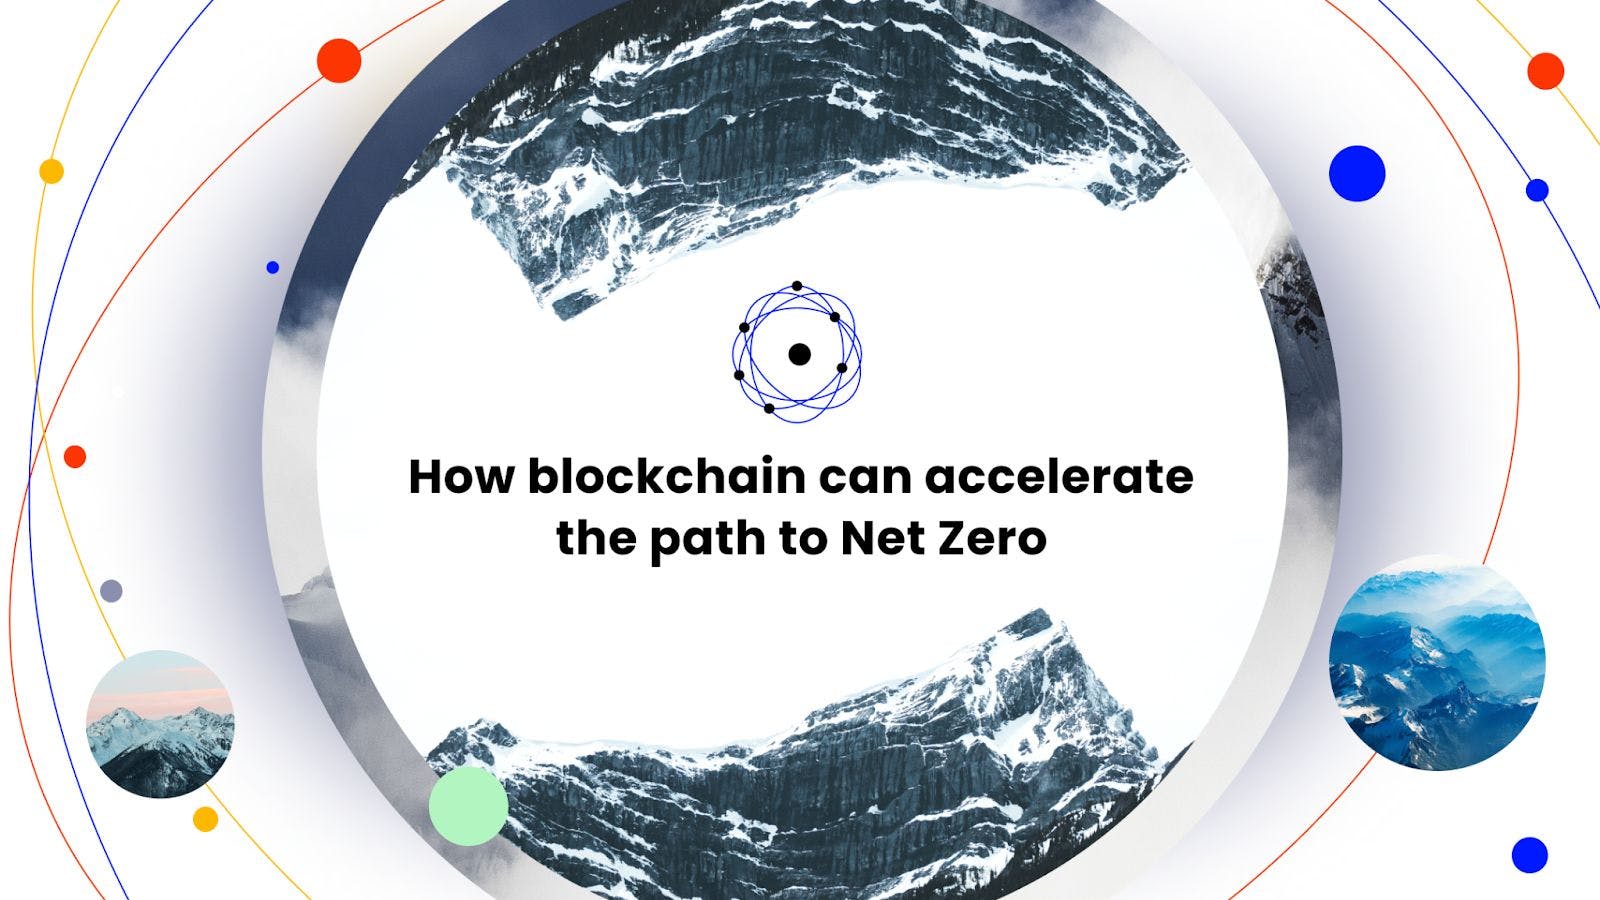 How blockchain can accelerate the path to Net Zero